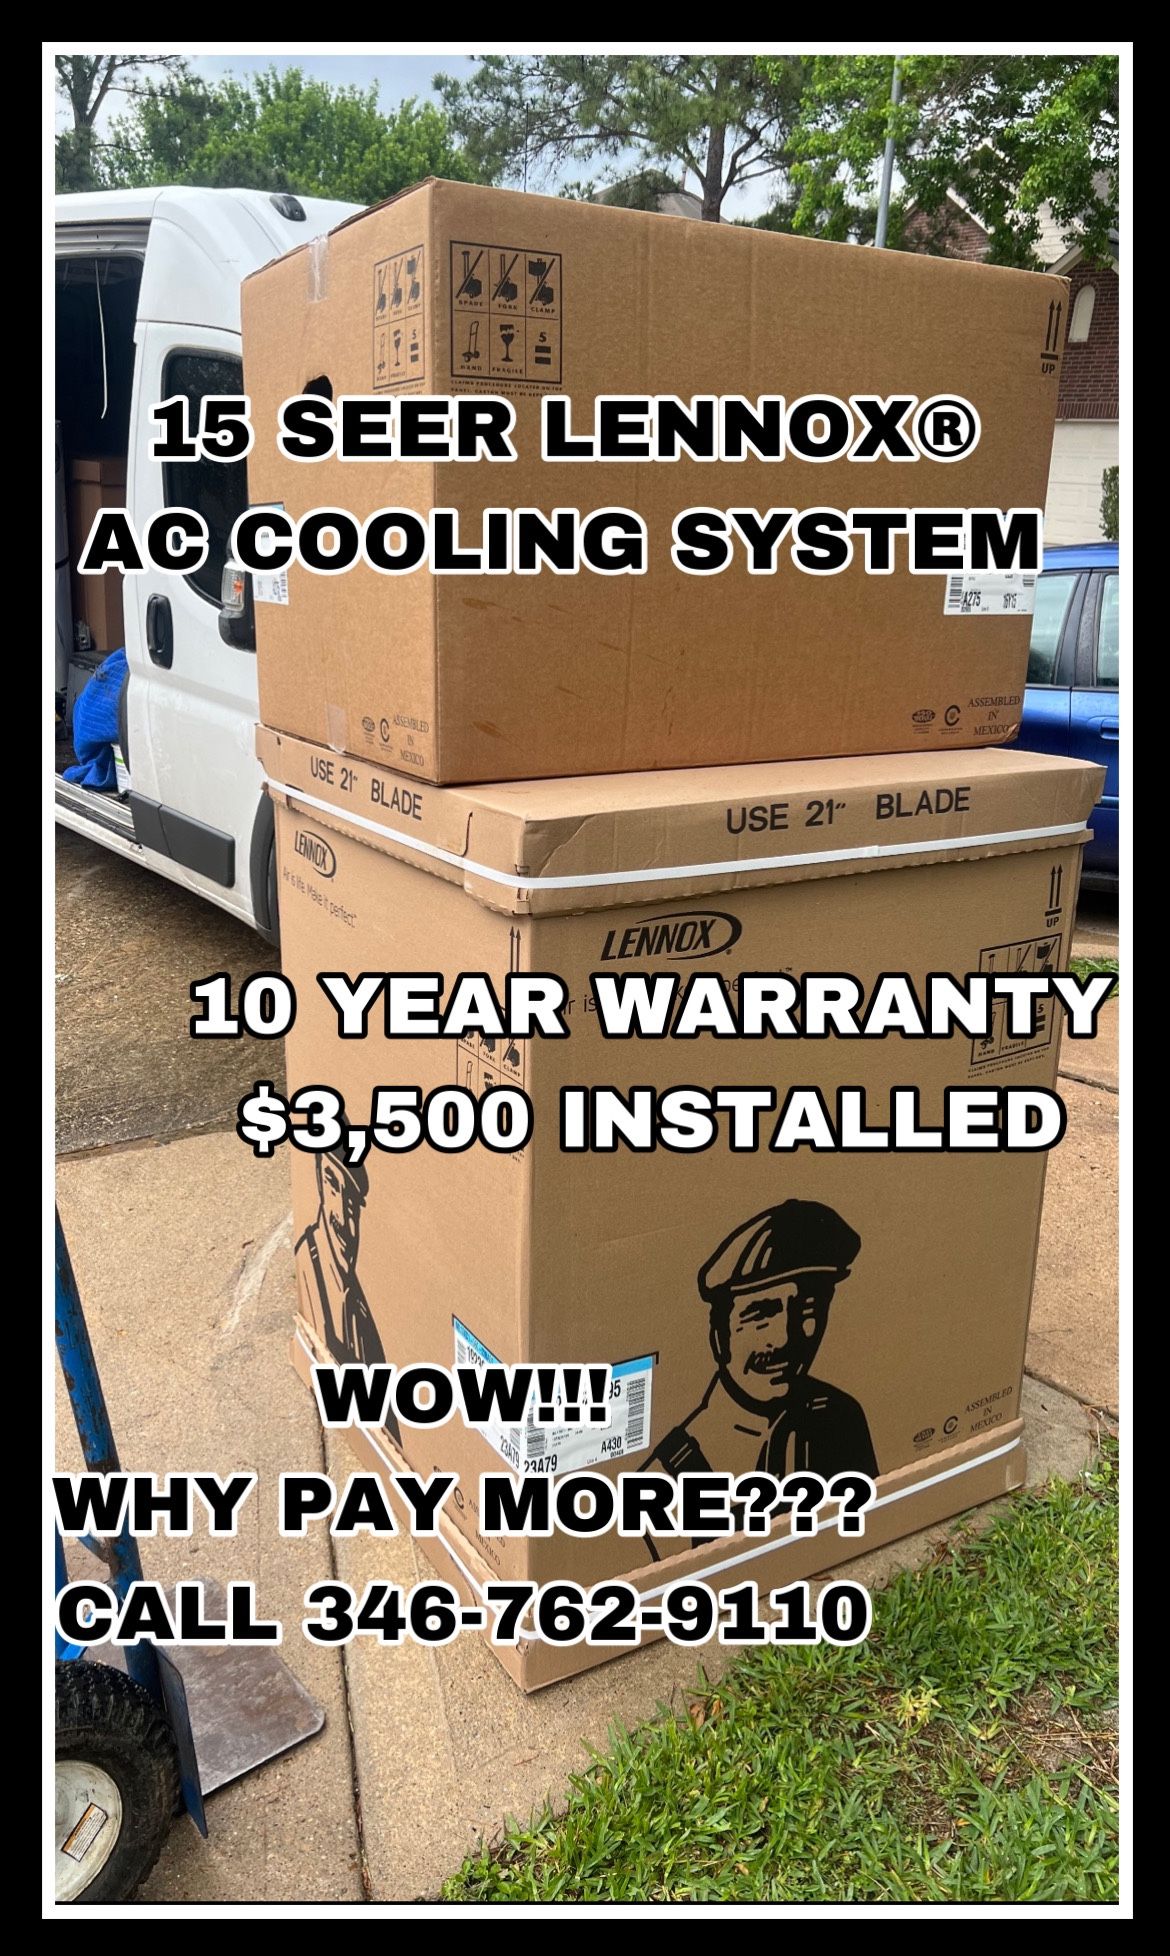 LENNOX 15 Seer AC cooling System Installed Includes: -Condenser -Evaporator coil -New Drain pan -New overflow switch -Refrigerant -Labor cost  (Price 